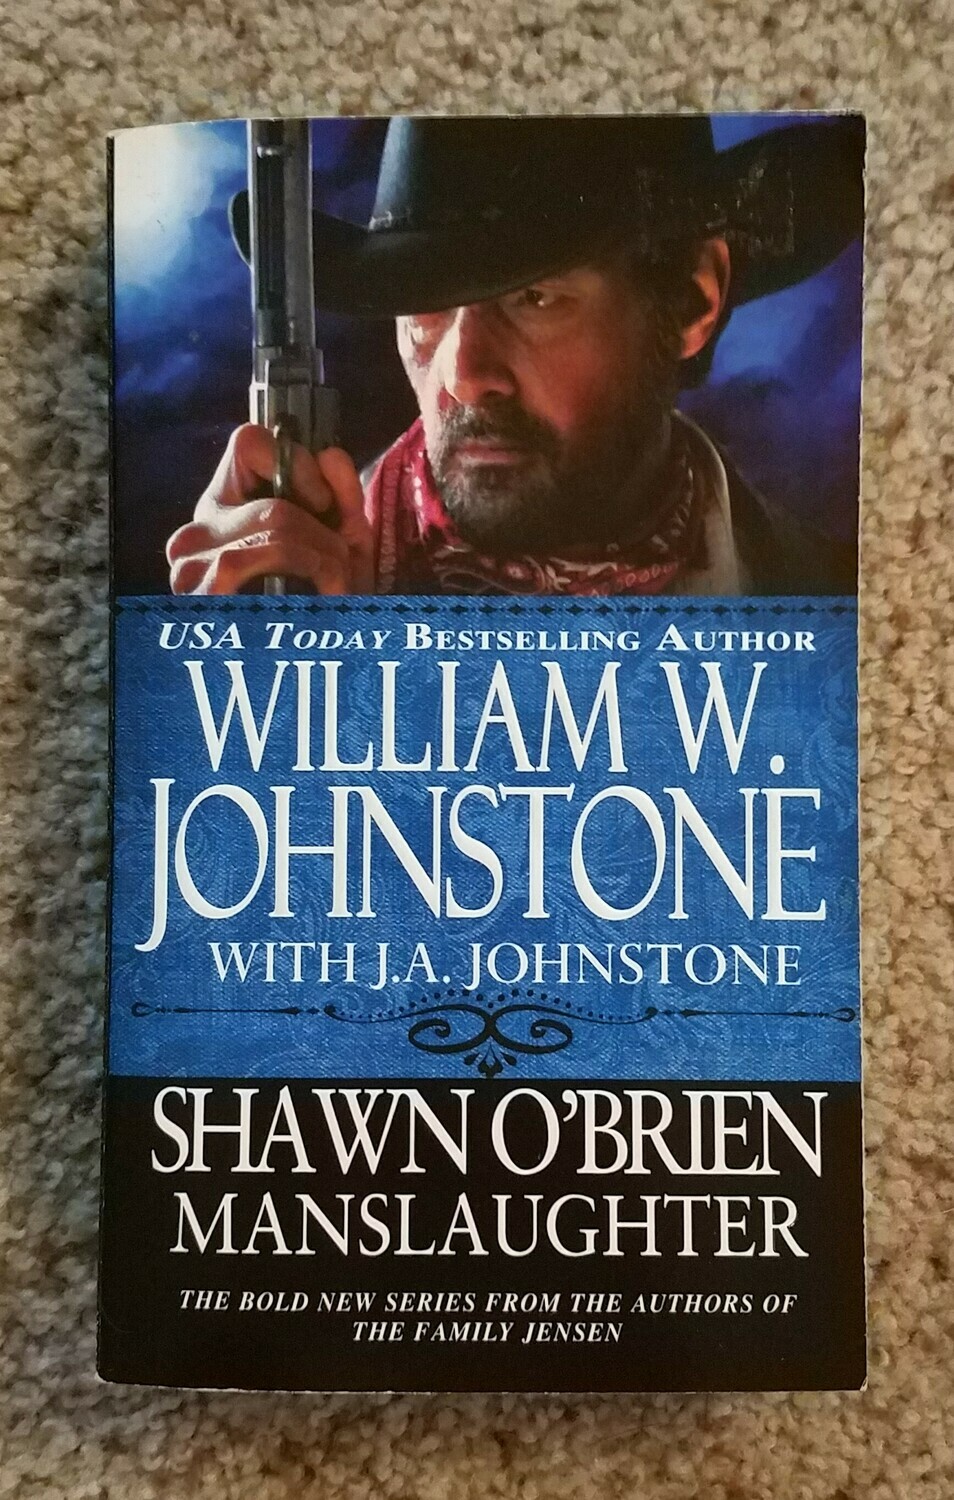 Shawn O'Brien: Manslaughter by William W. Johnstone with J.A. Johnstone